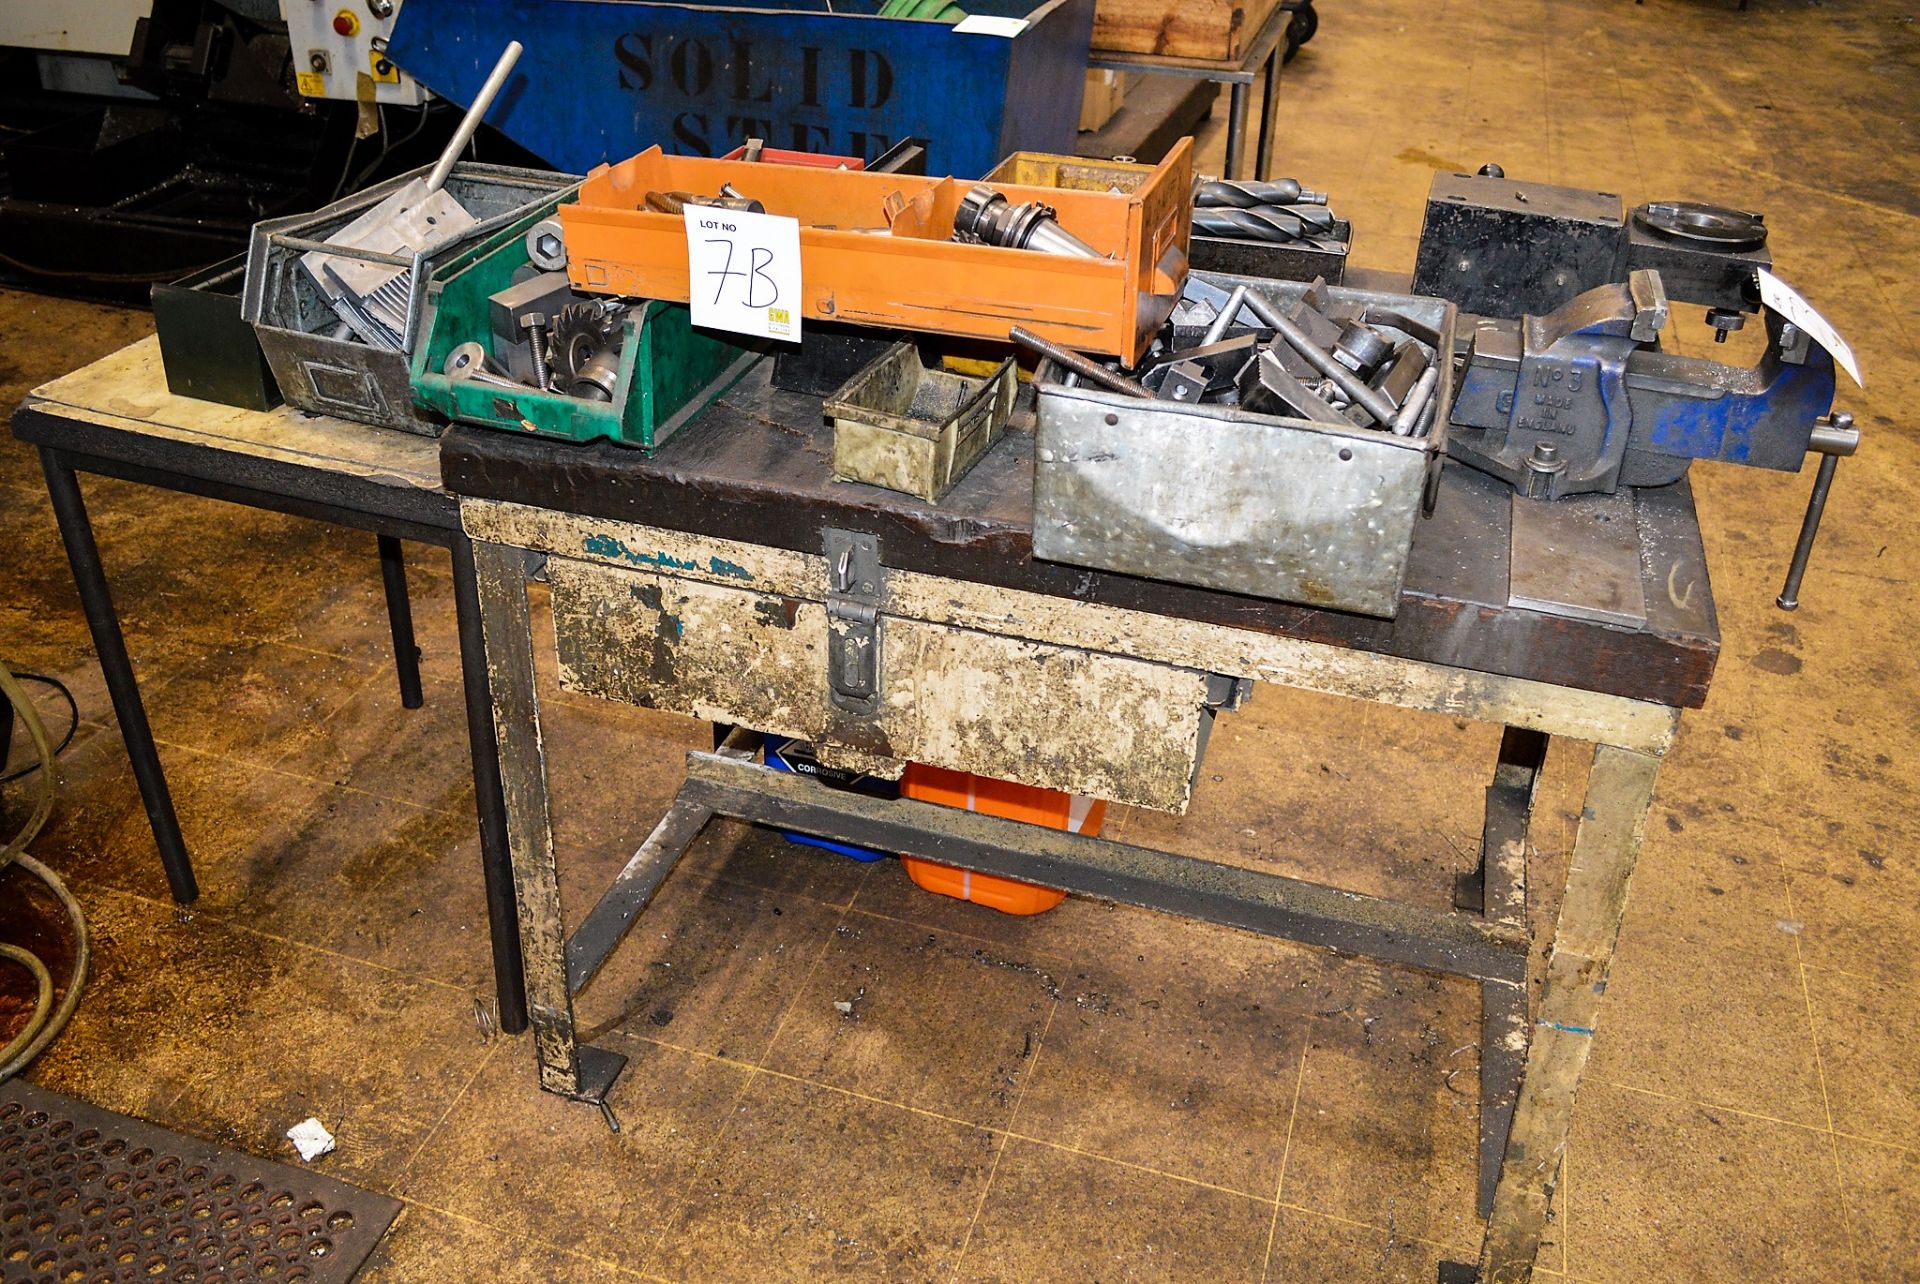 Steel bench & contents of tooling as lotted